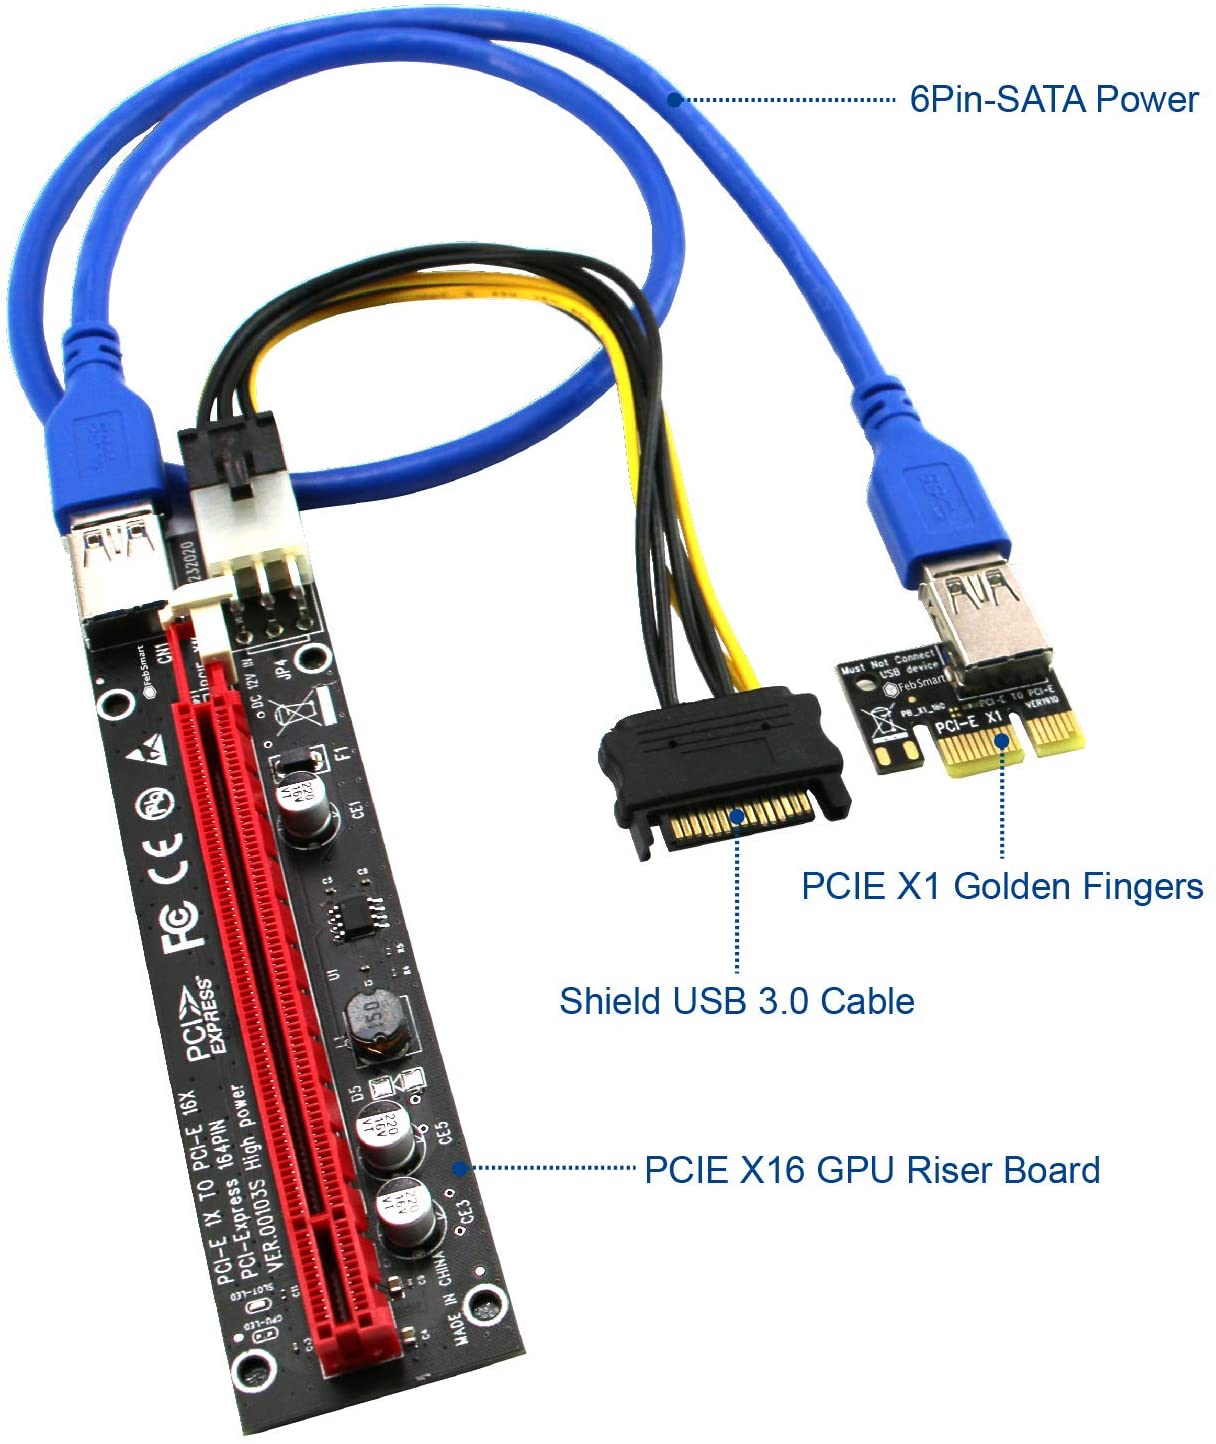 PCIE Riser Cable VER006C,GPU Risers for Mining Rigs,GPU Extension Cable,GPU Crypto Currency Mining Cable with 6Pin-SATA Power Cable and 23.6in Extension Cable,Extend PCIE X1 to PCIE X16(PCE-VER006C)